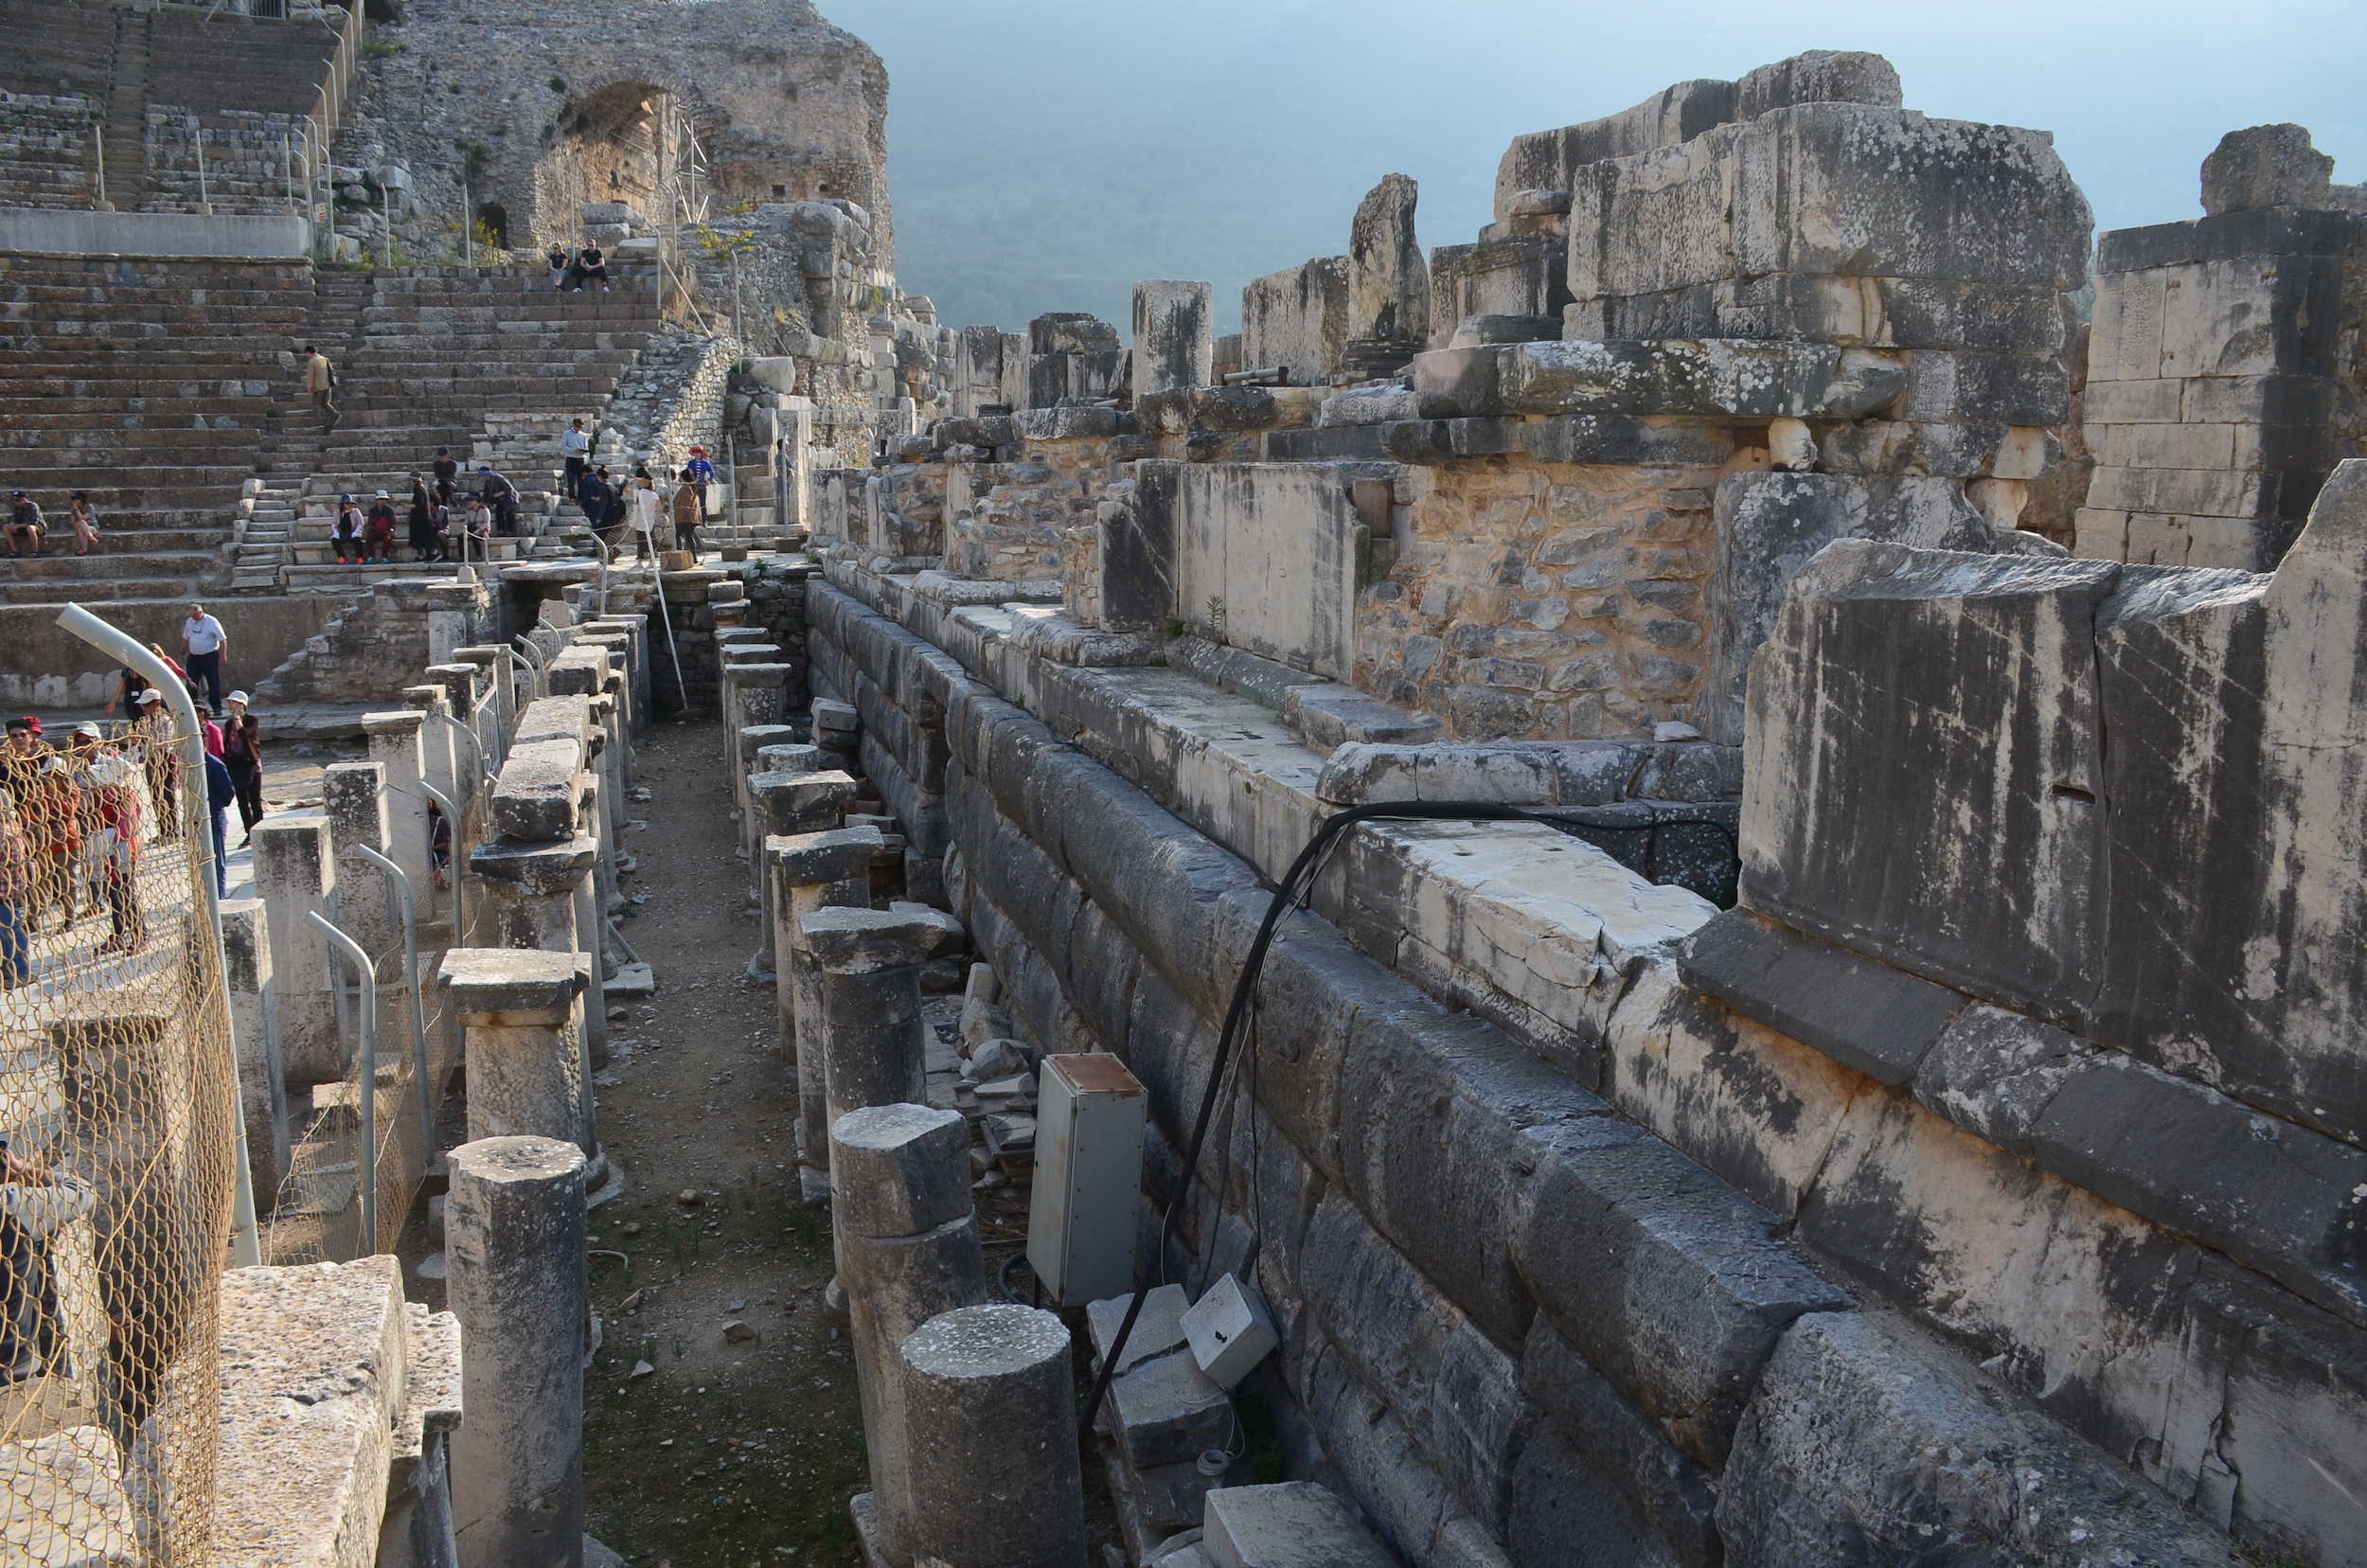 Behind the stage at the Great Theatre of Ephesus